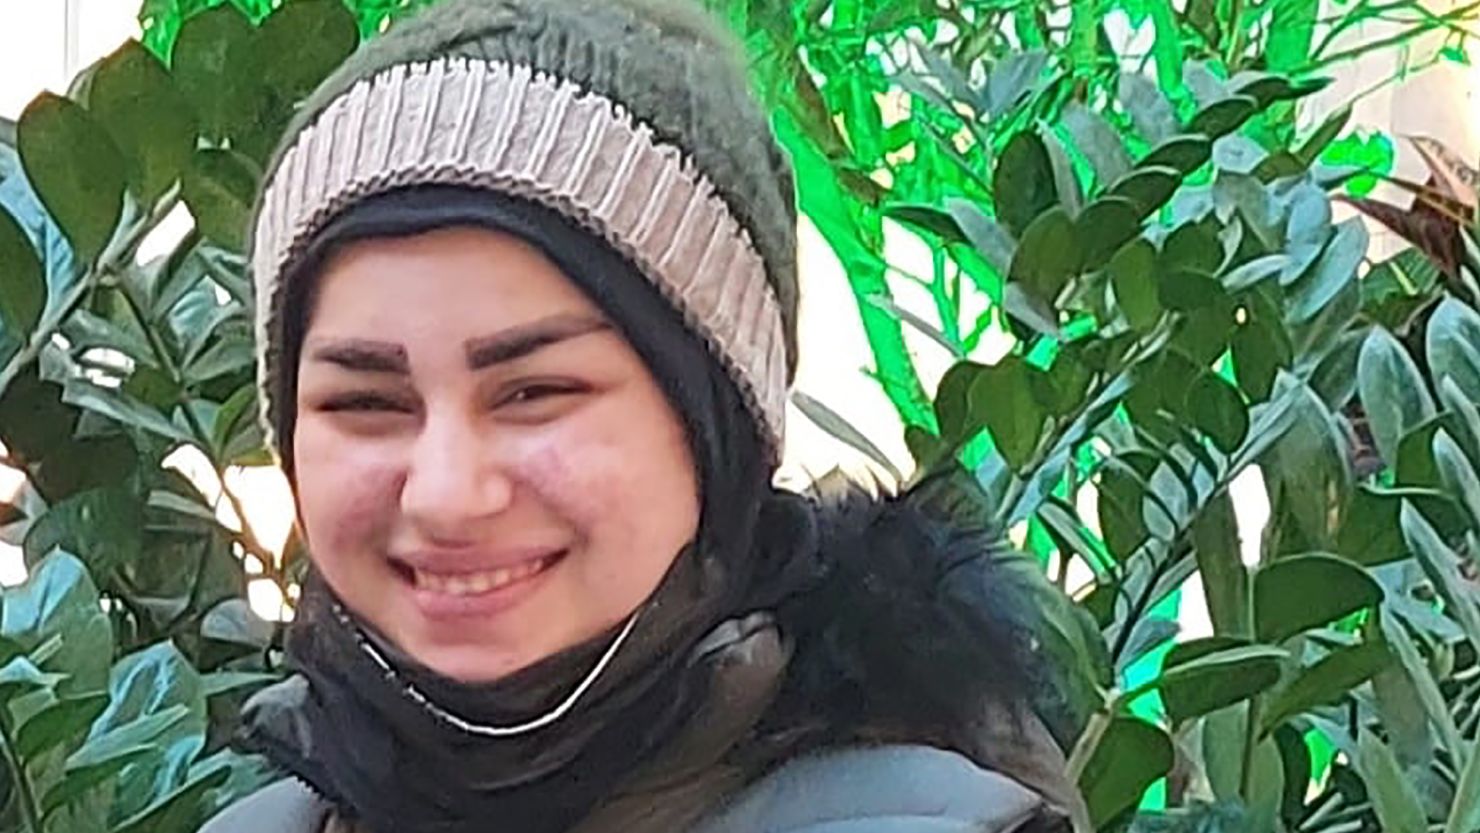 The victim had fled to Turkey before being persuaded to return to Iran by her father.